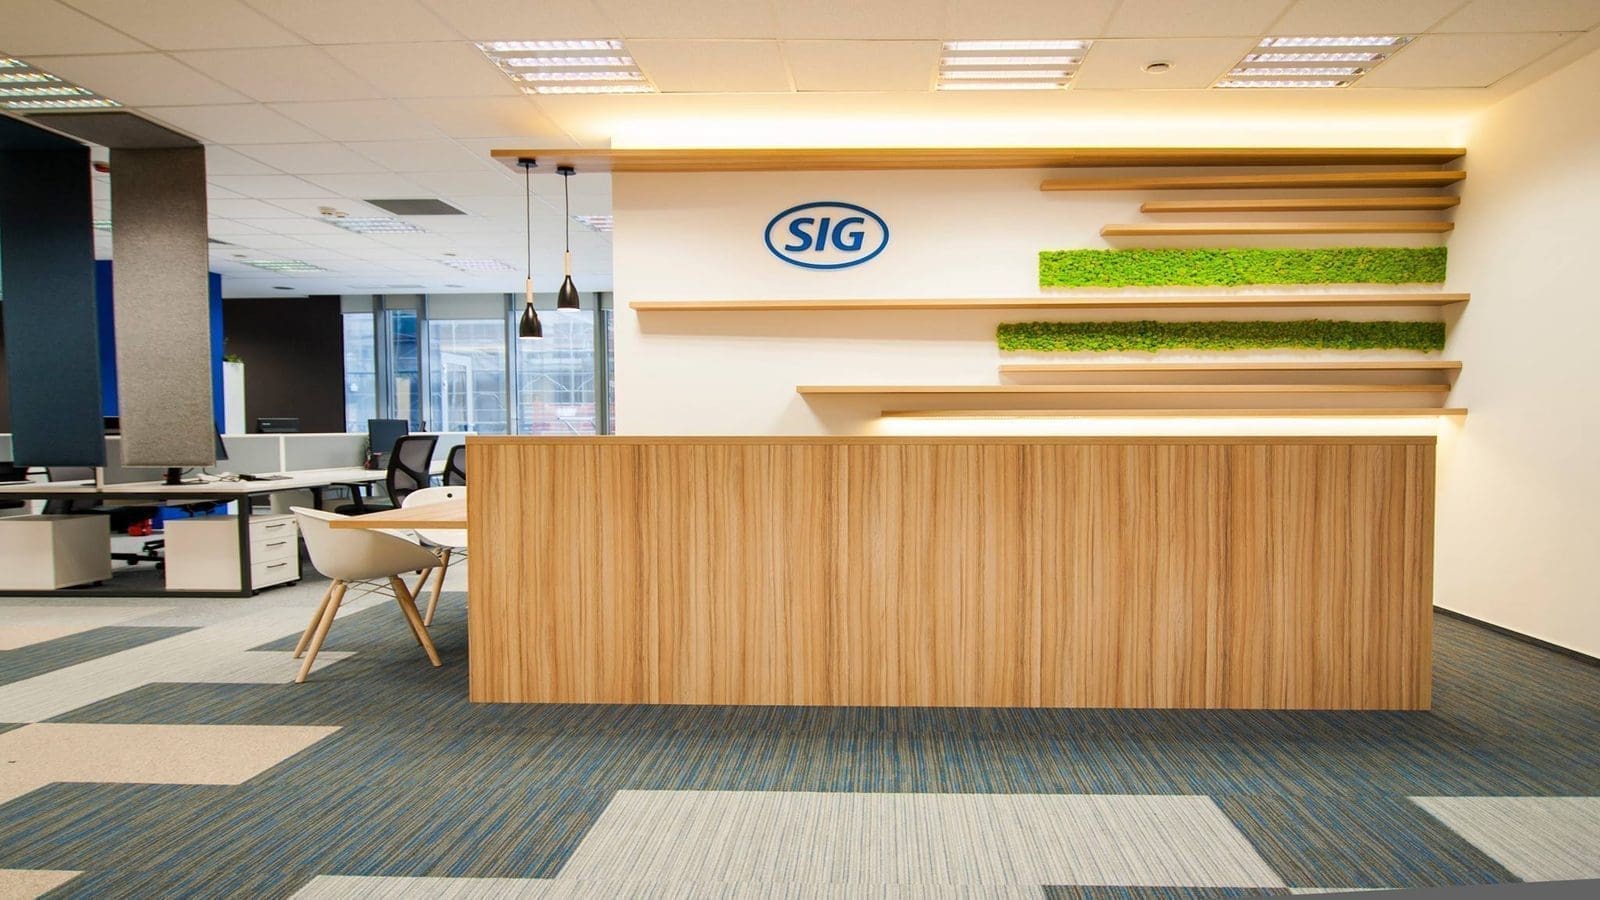 SIG inaugurates technology center in Dubai to bolster support for customers in MEA